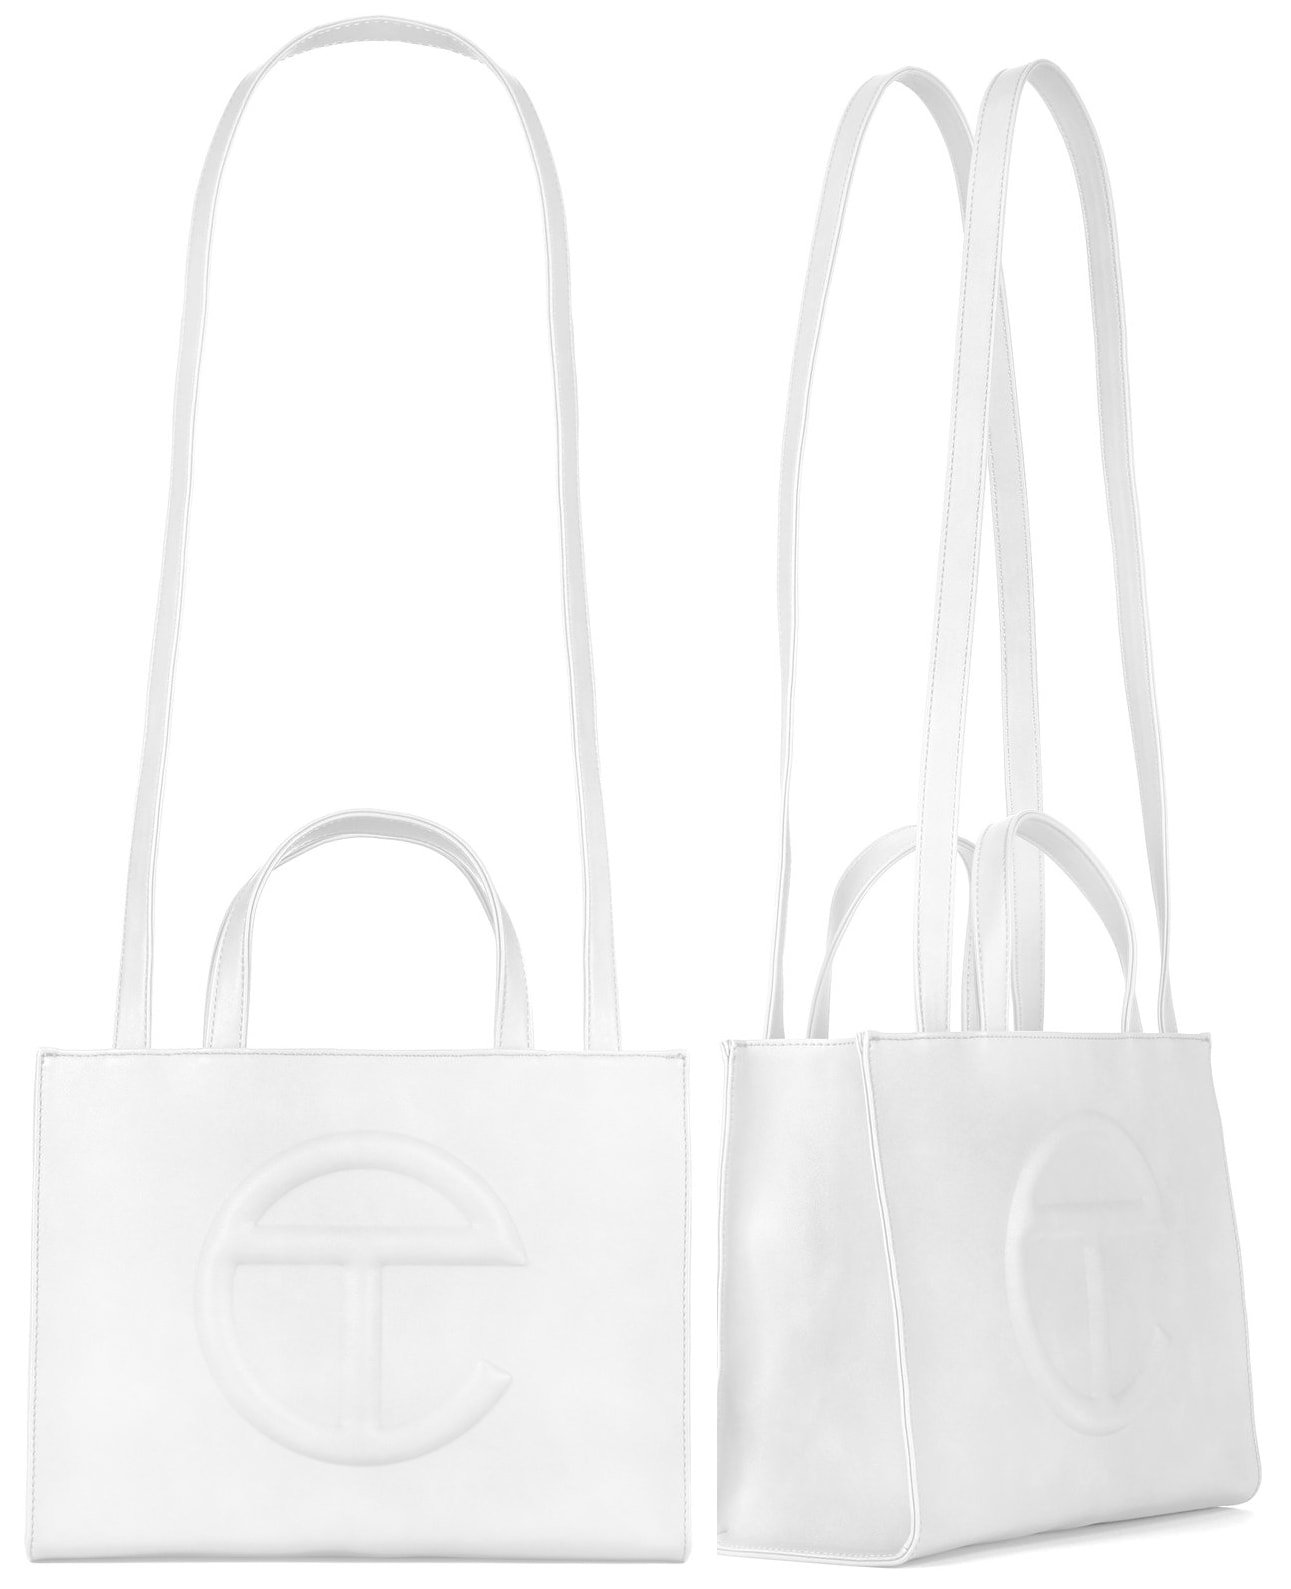 The Telfar medium shopping bag measures 10.75 inches tall, 15 inches wide, and has a depth of five inches